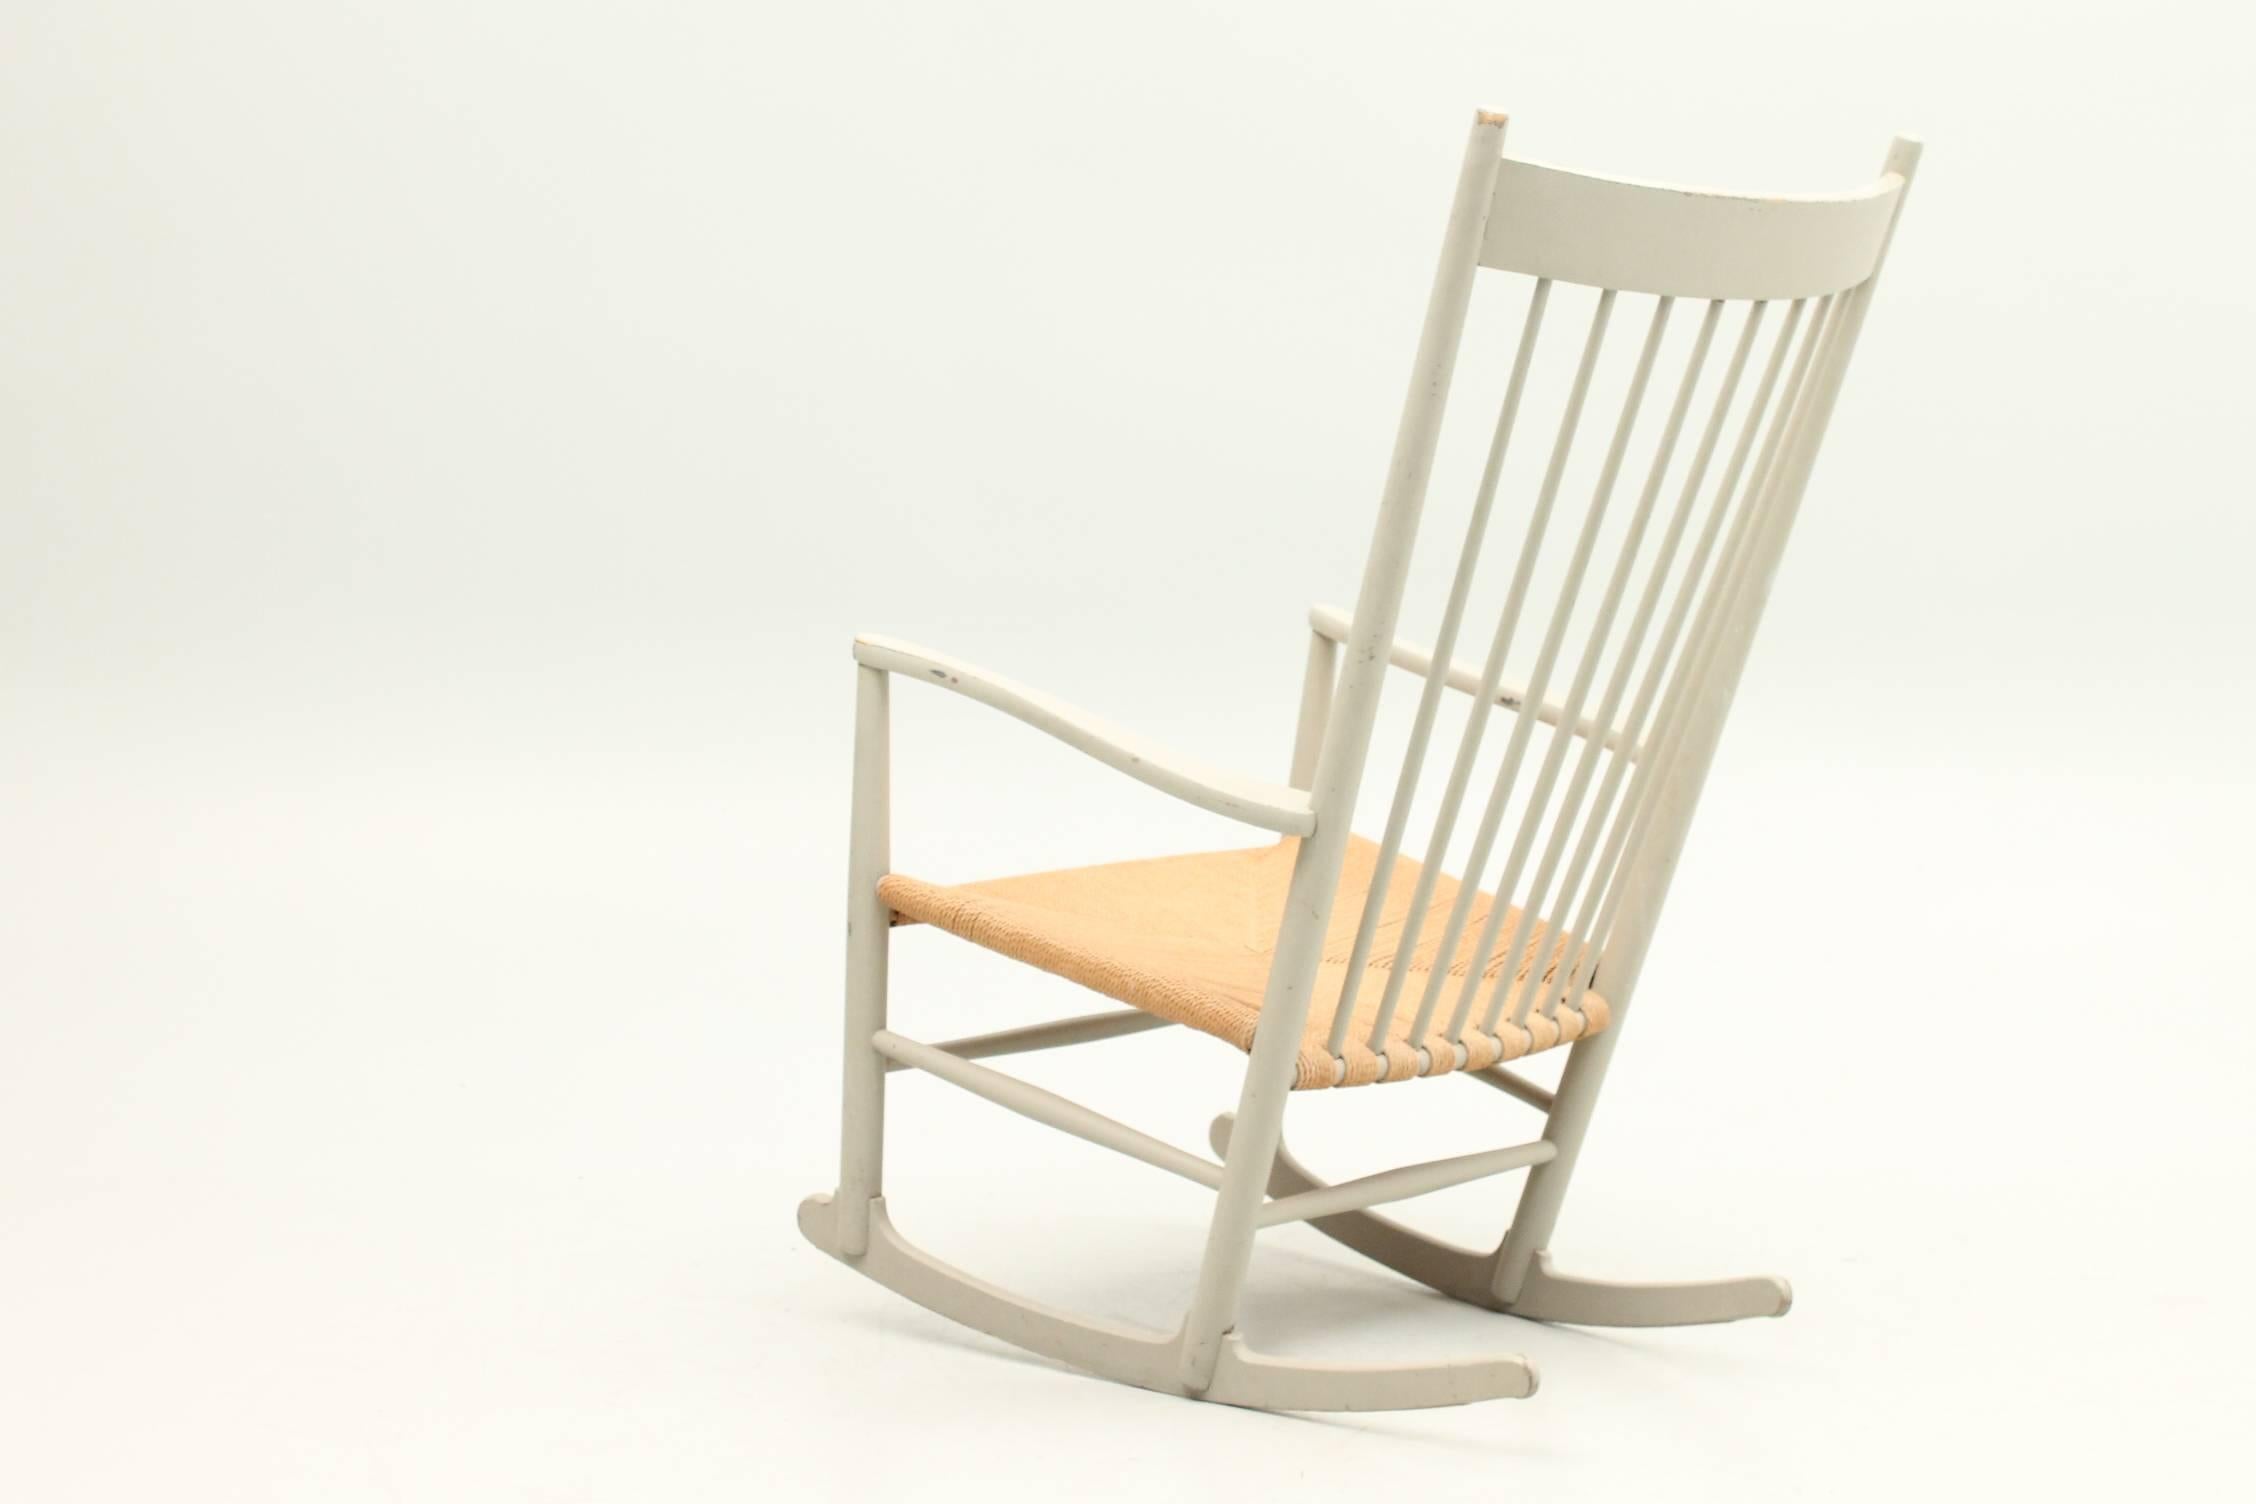 Beautiful model J16 rocking chair designed by Hans Wegner for FDB Møbler. The rocking chair is made of a beech frame that has been painted a beautiful light gray color. The seat is made of wicker and the seat is in excellent condition. The chair has